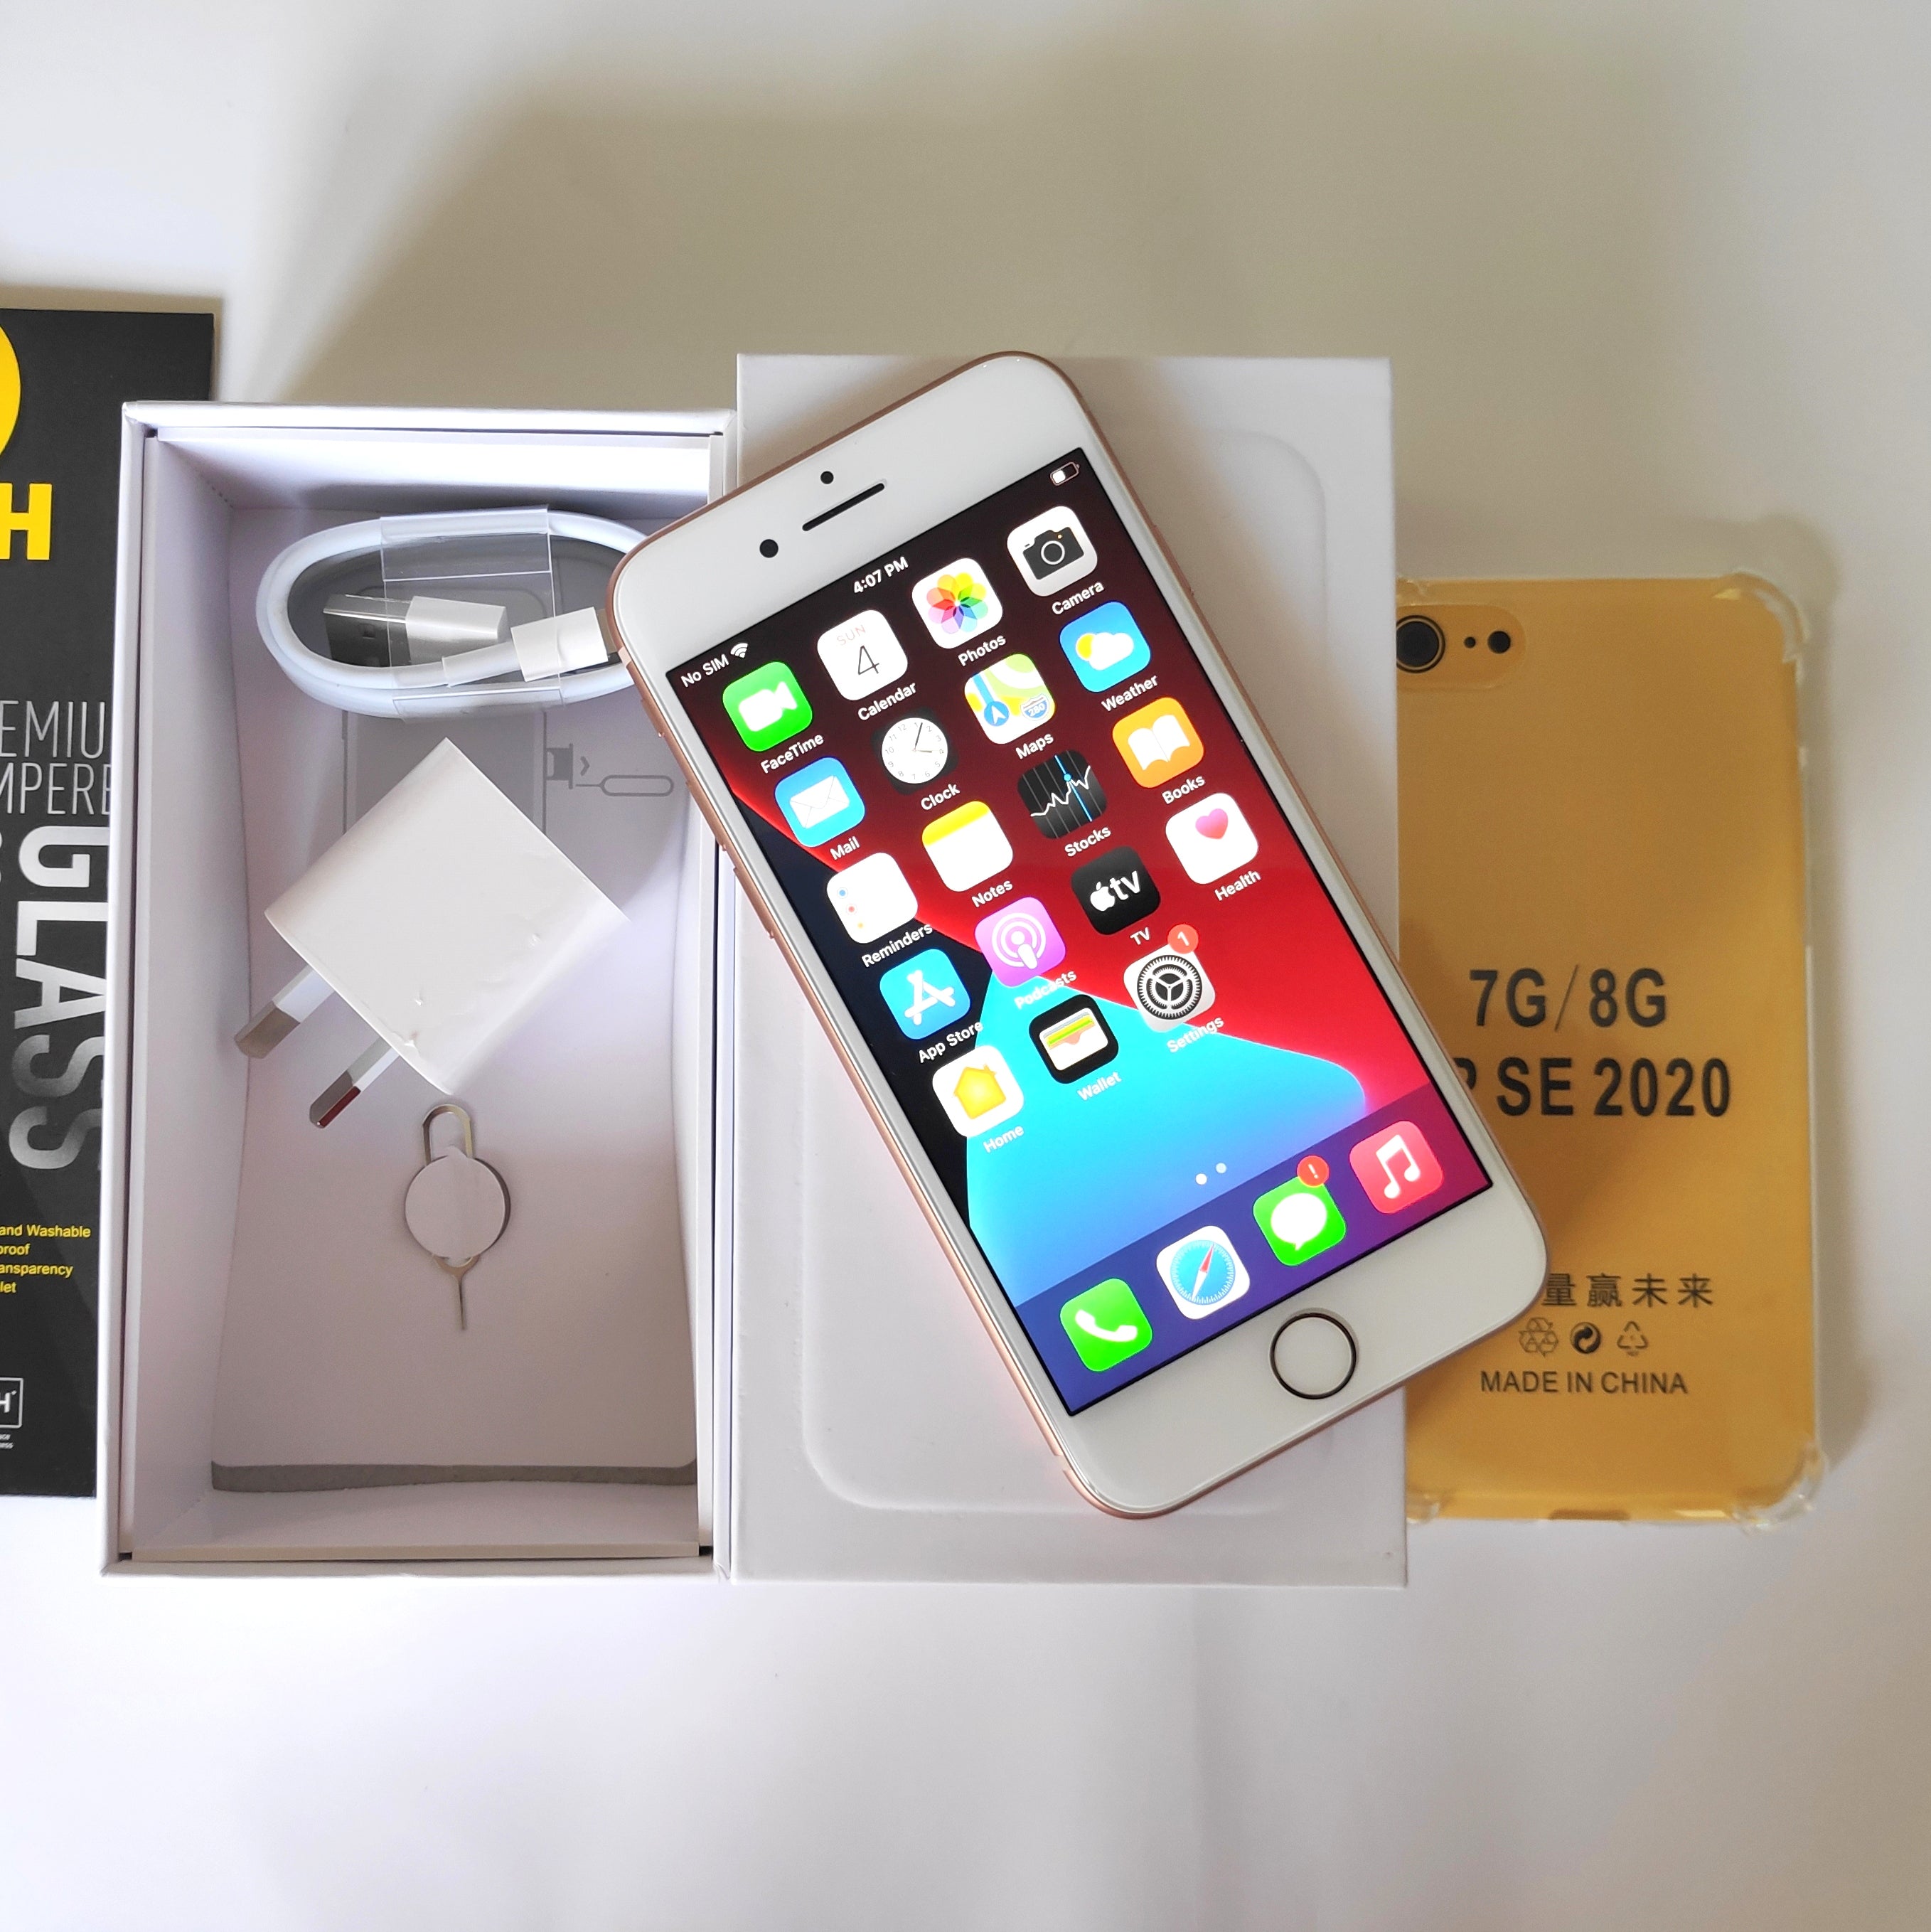 Apple iPhone 8 64GB Gold - New Battery, Case, Screen Protector & Shipping (As New)